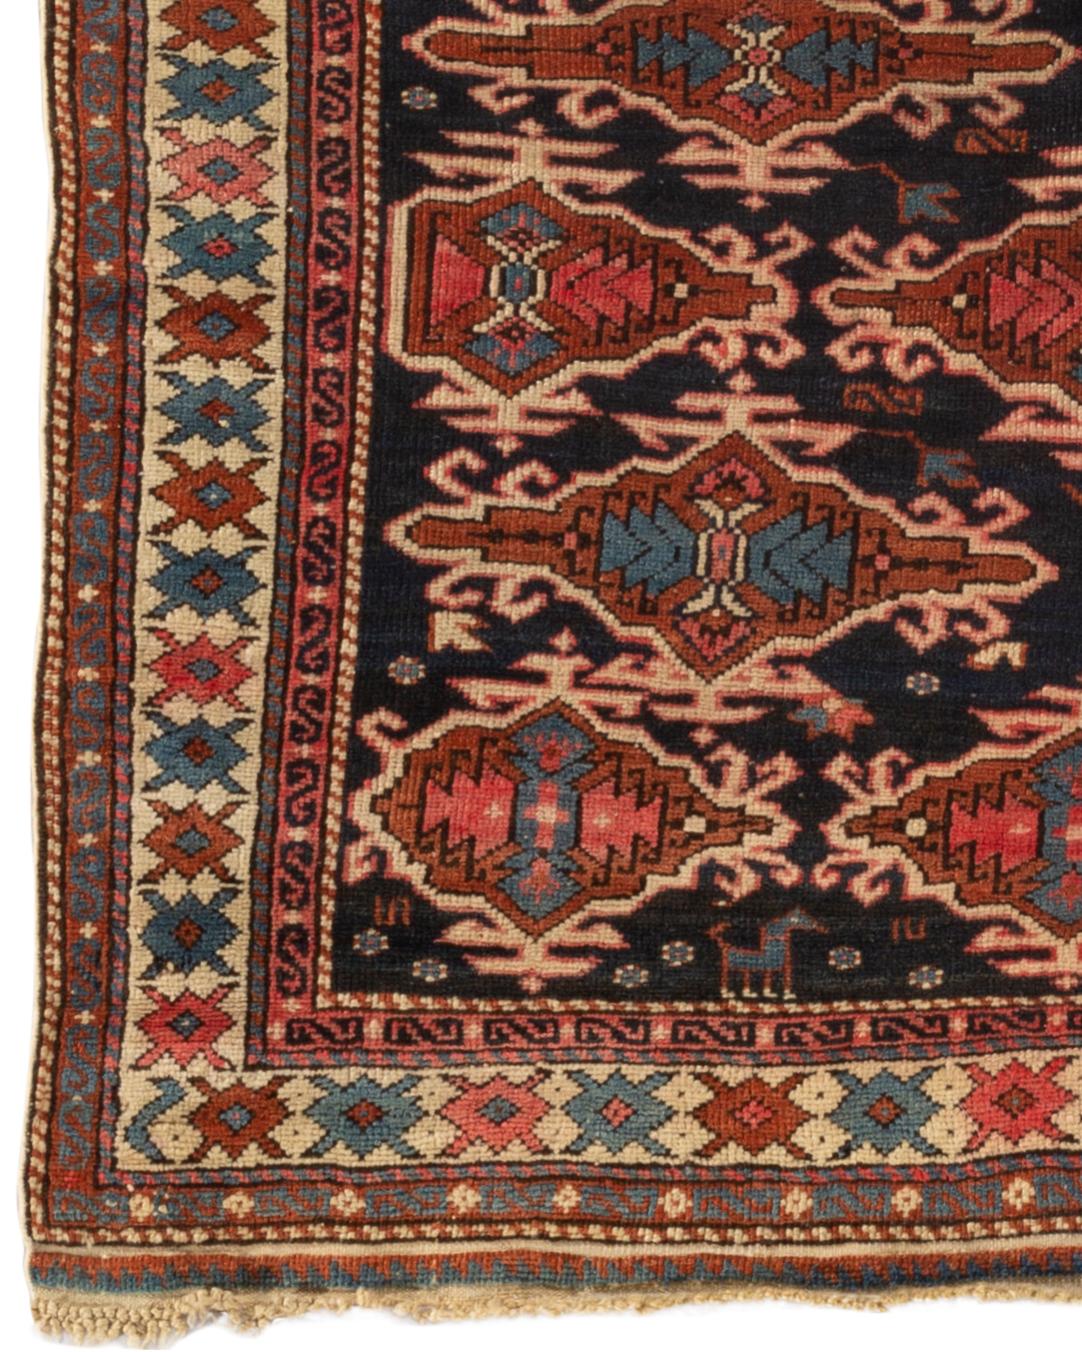 Antique Caucasian Shirvan rug, circa 1880. These types of antique Caucasian rugs were woven in the eastern part of the region, mostly along the west coast of the Caspian Sea and show in the design, the ethnic style associated with Caucasian pieces.